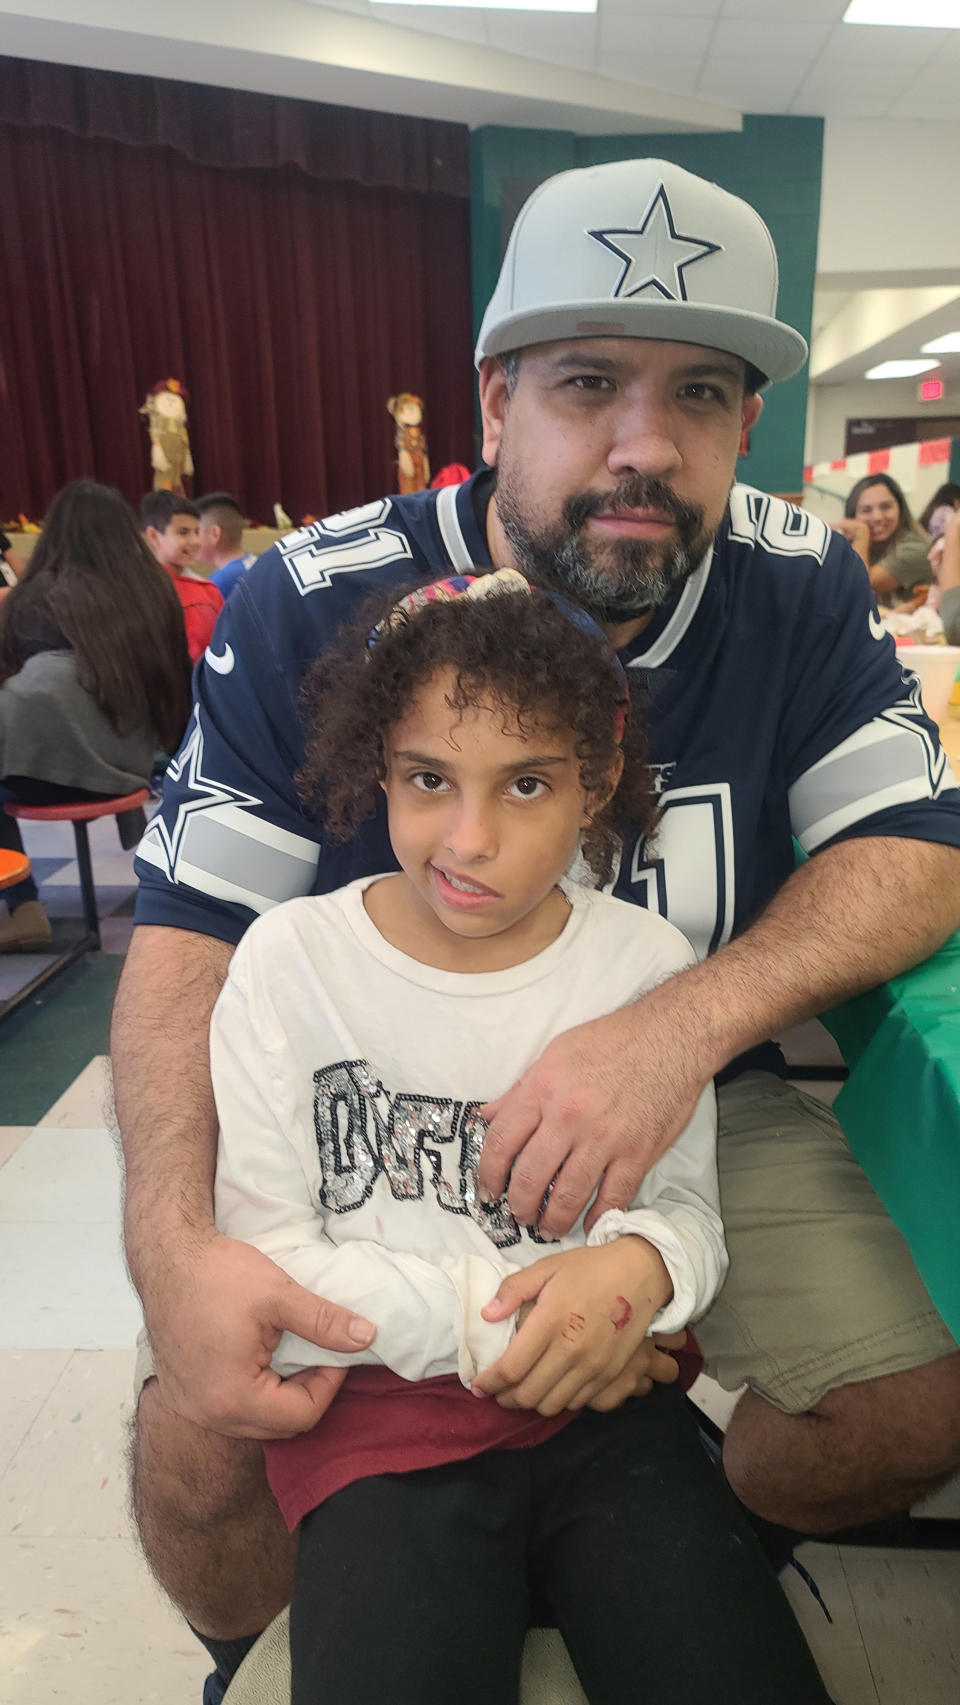 In this image provided by Vincent Salazar, he poses with his daughter Layla Salazar. Layla was one of the 19 children and their two teachers who were gunned down behind a barricaded door at Robb Elementary School in Uvalde, Texas, on Tuesday, May 24, 2022. (Vincent Salazar via AP)